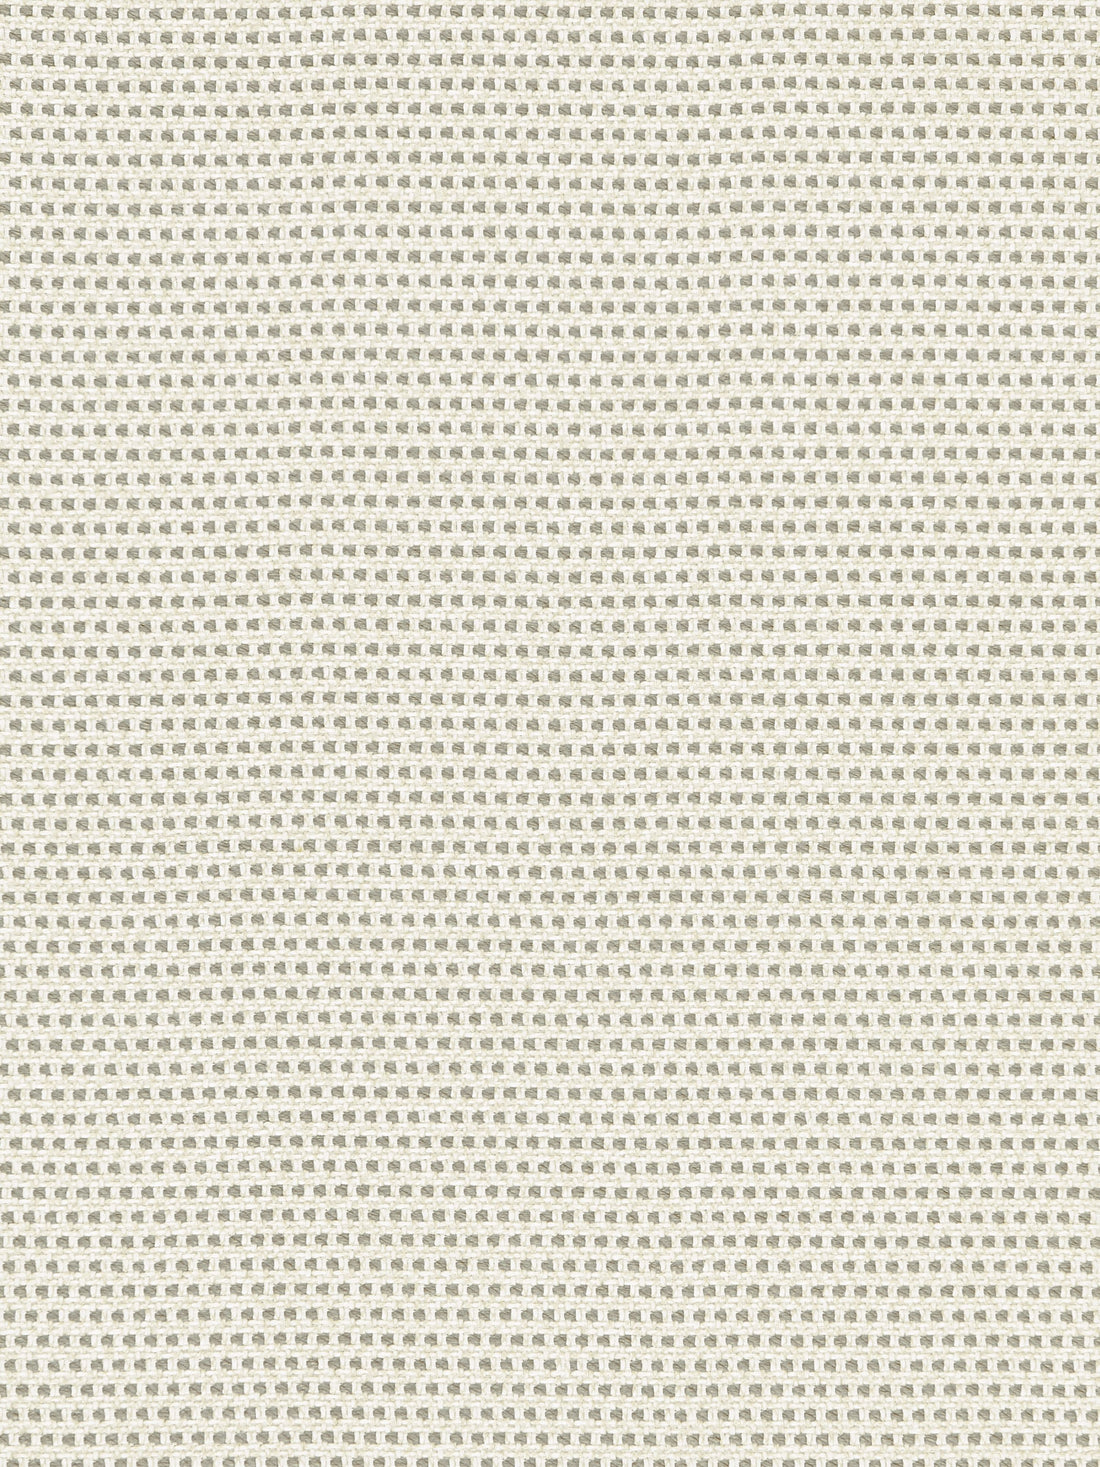 El Faro Beach fabric in linen color - pattern number EA 00026037 - by Scalamandre in the Old World Weavers collection